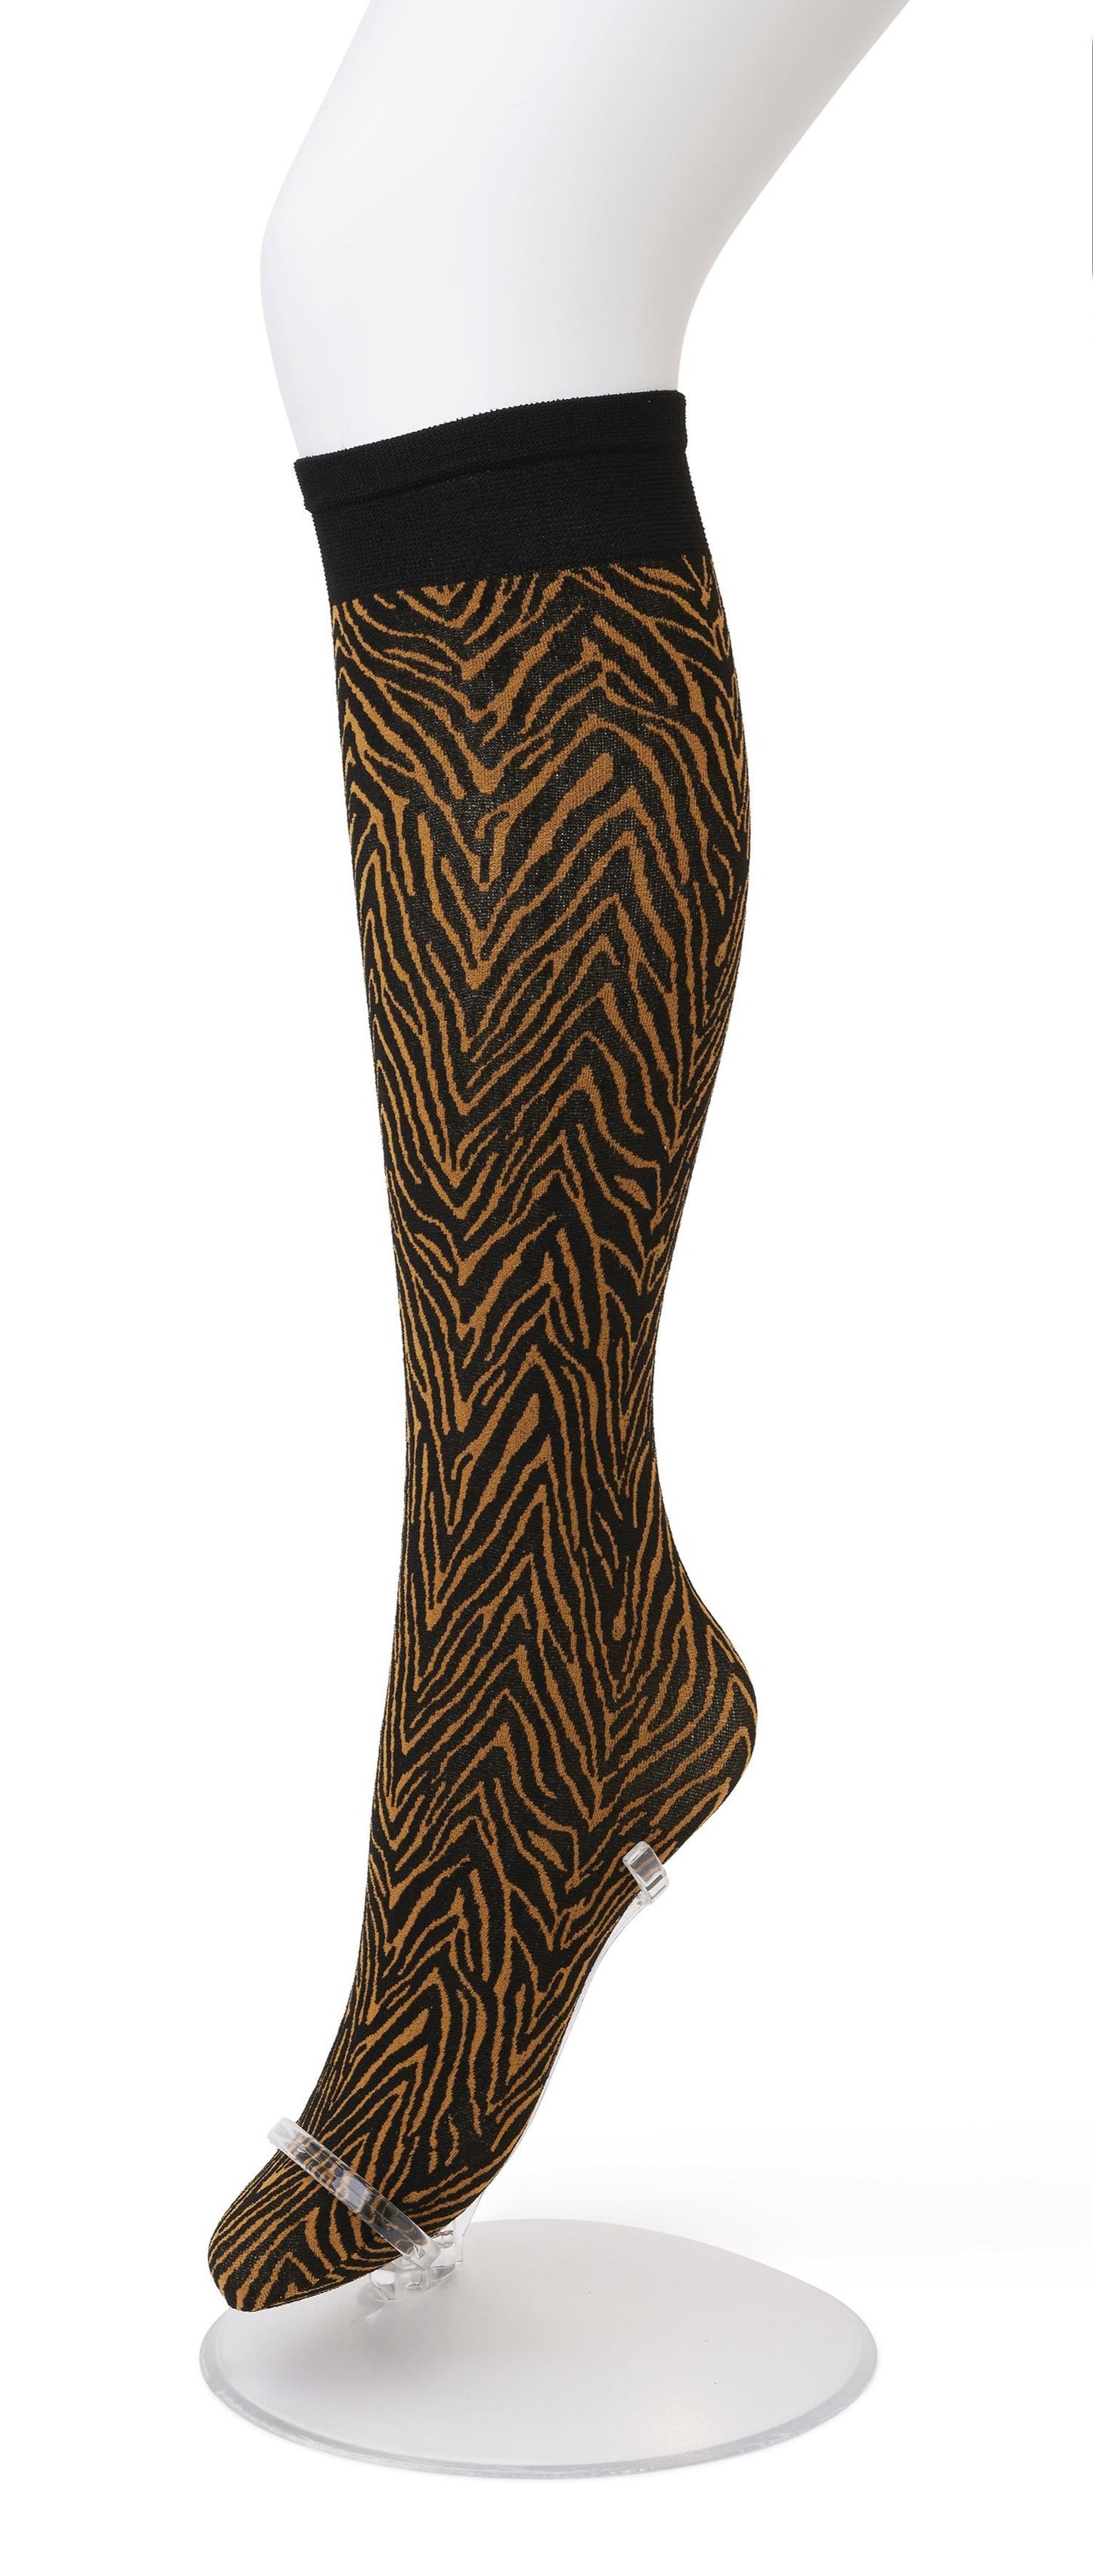 Bonnie Doon BP211509 Minotauro Knee-highs - Black opaque fashion knee-high socks with a linear zebra style pattern in rust.